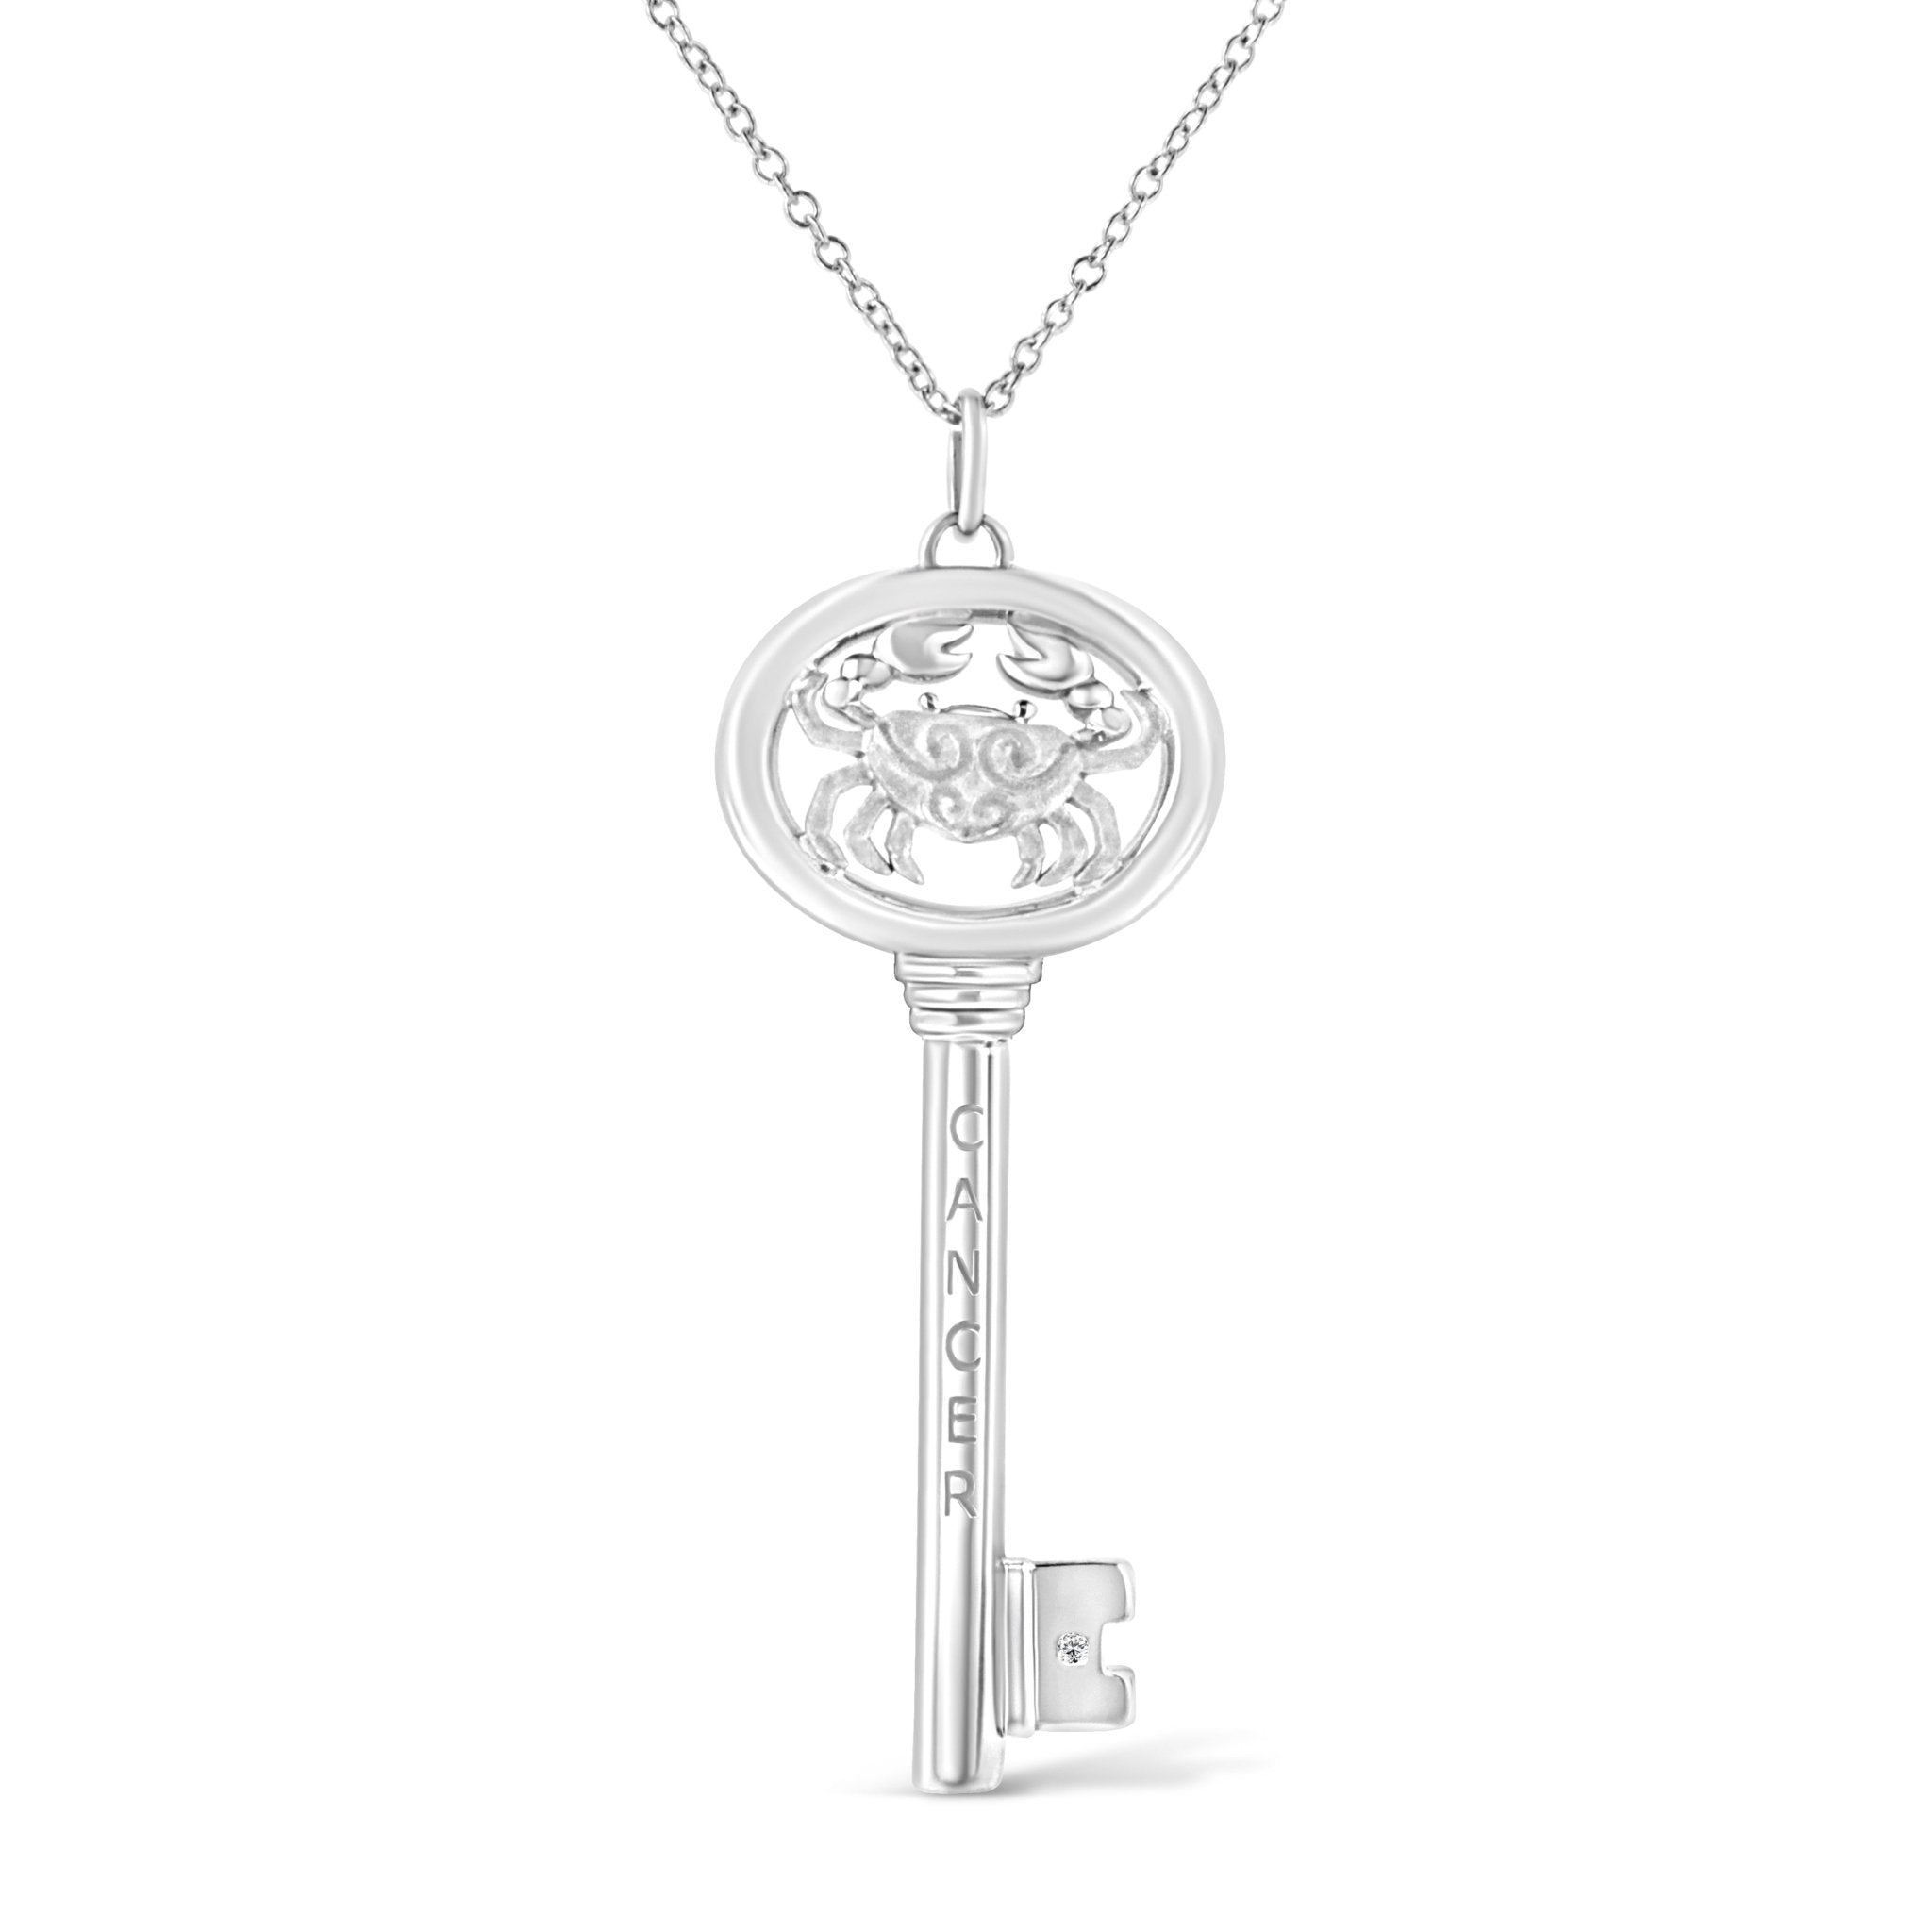 .925 Sterling Silver Diamond Accent Cancer Zodiac Key 18" Pendant Necklace (K-L Color, I1-I2 Clarity) - Tuesday Morning-Pendant Necklace